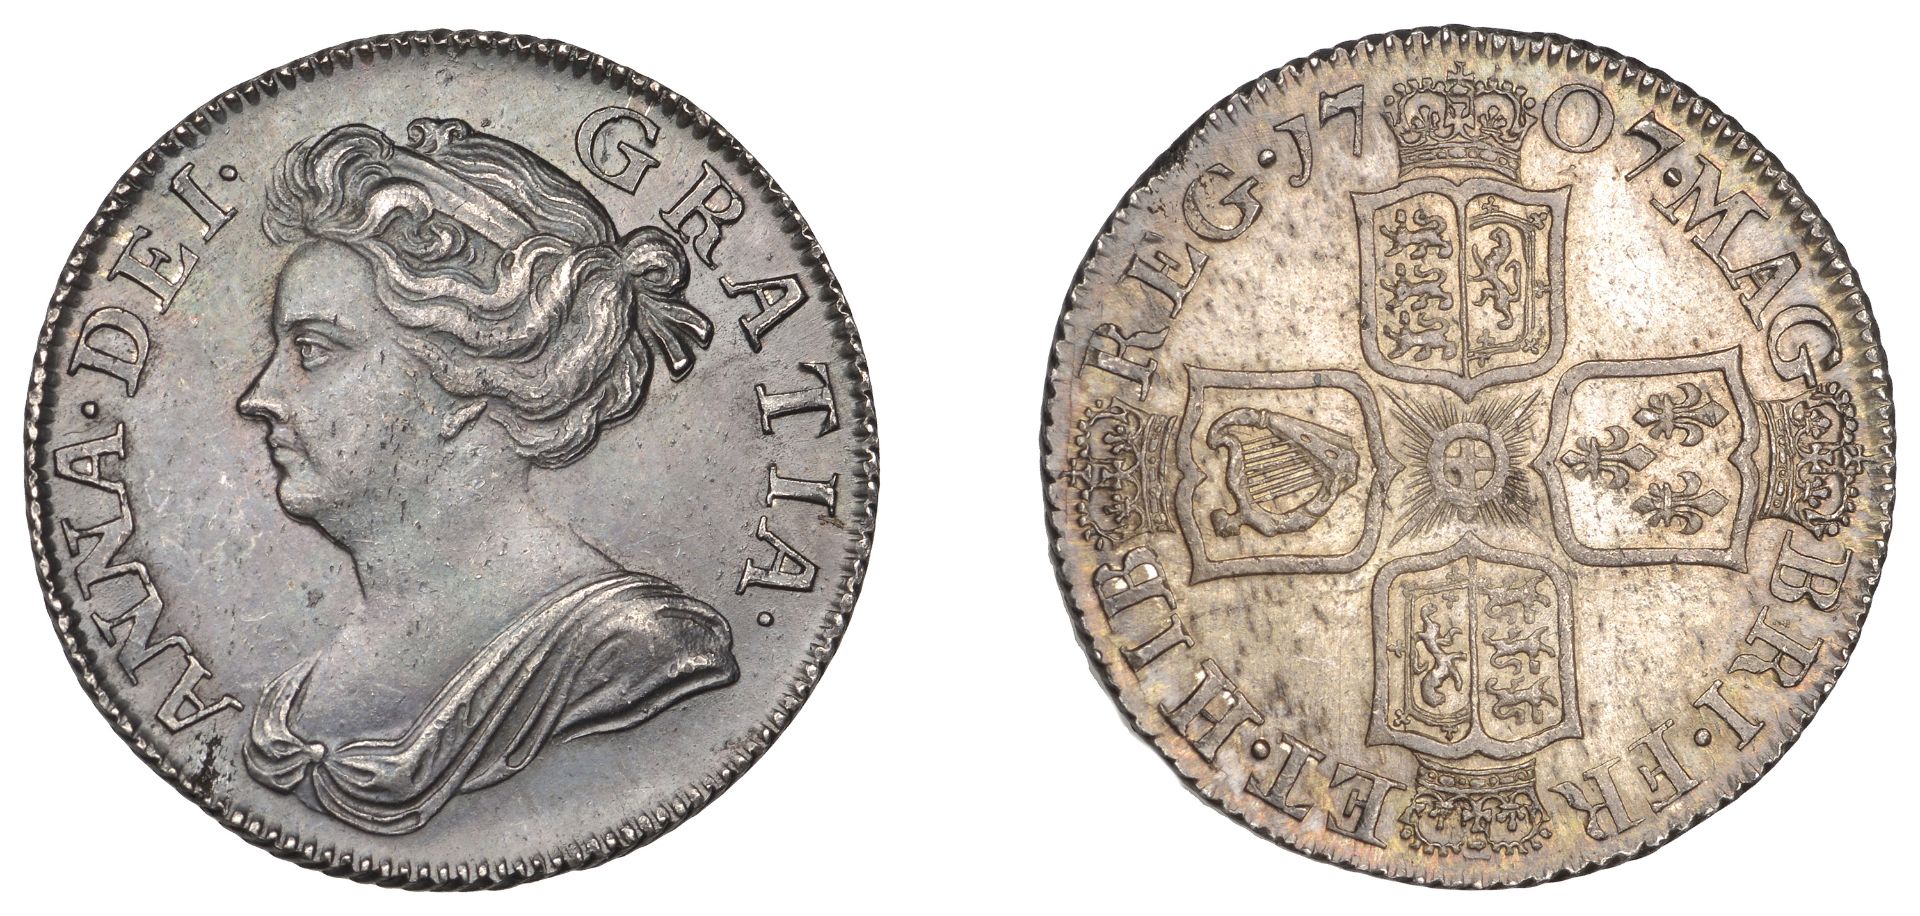 Anne (1702-1714), Shilling, 1707 (ESC 1395; S 3610). Extremely fine, dark tone on obverse Â£...